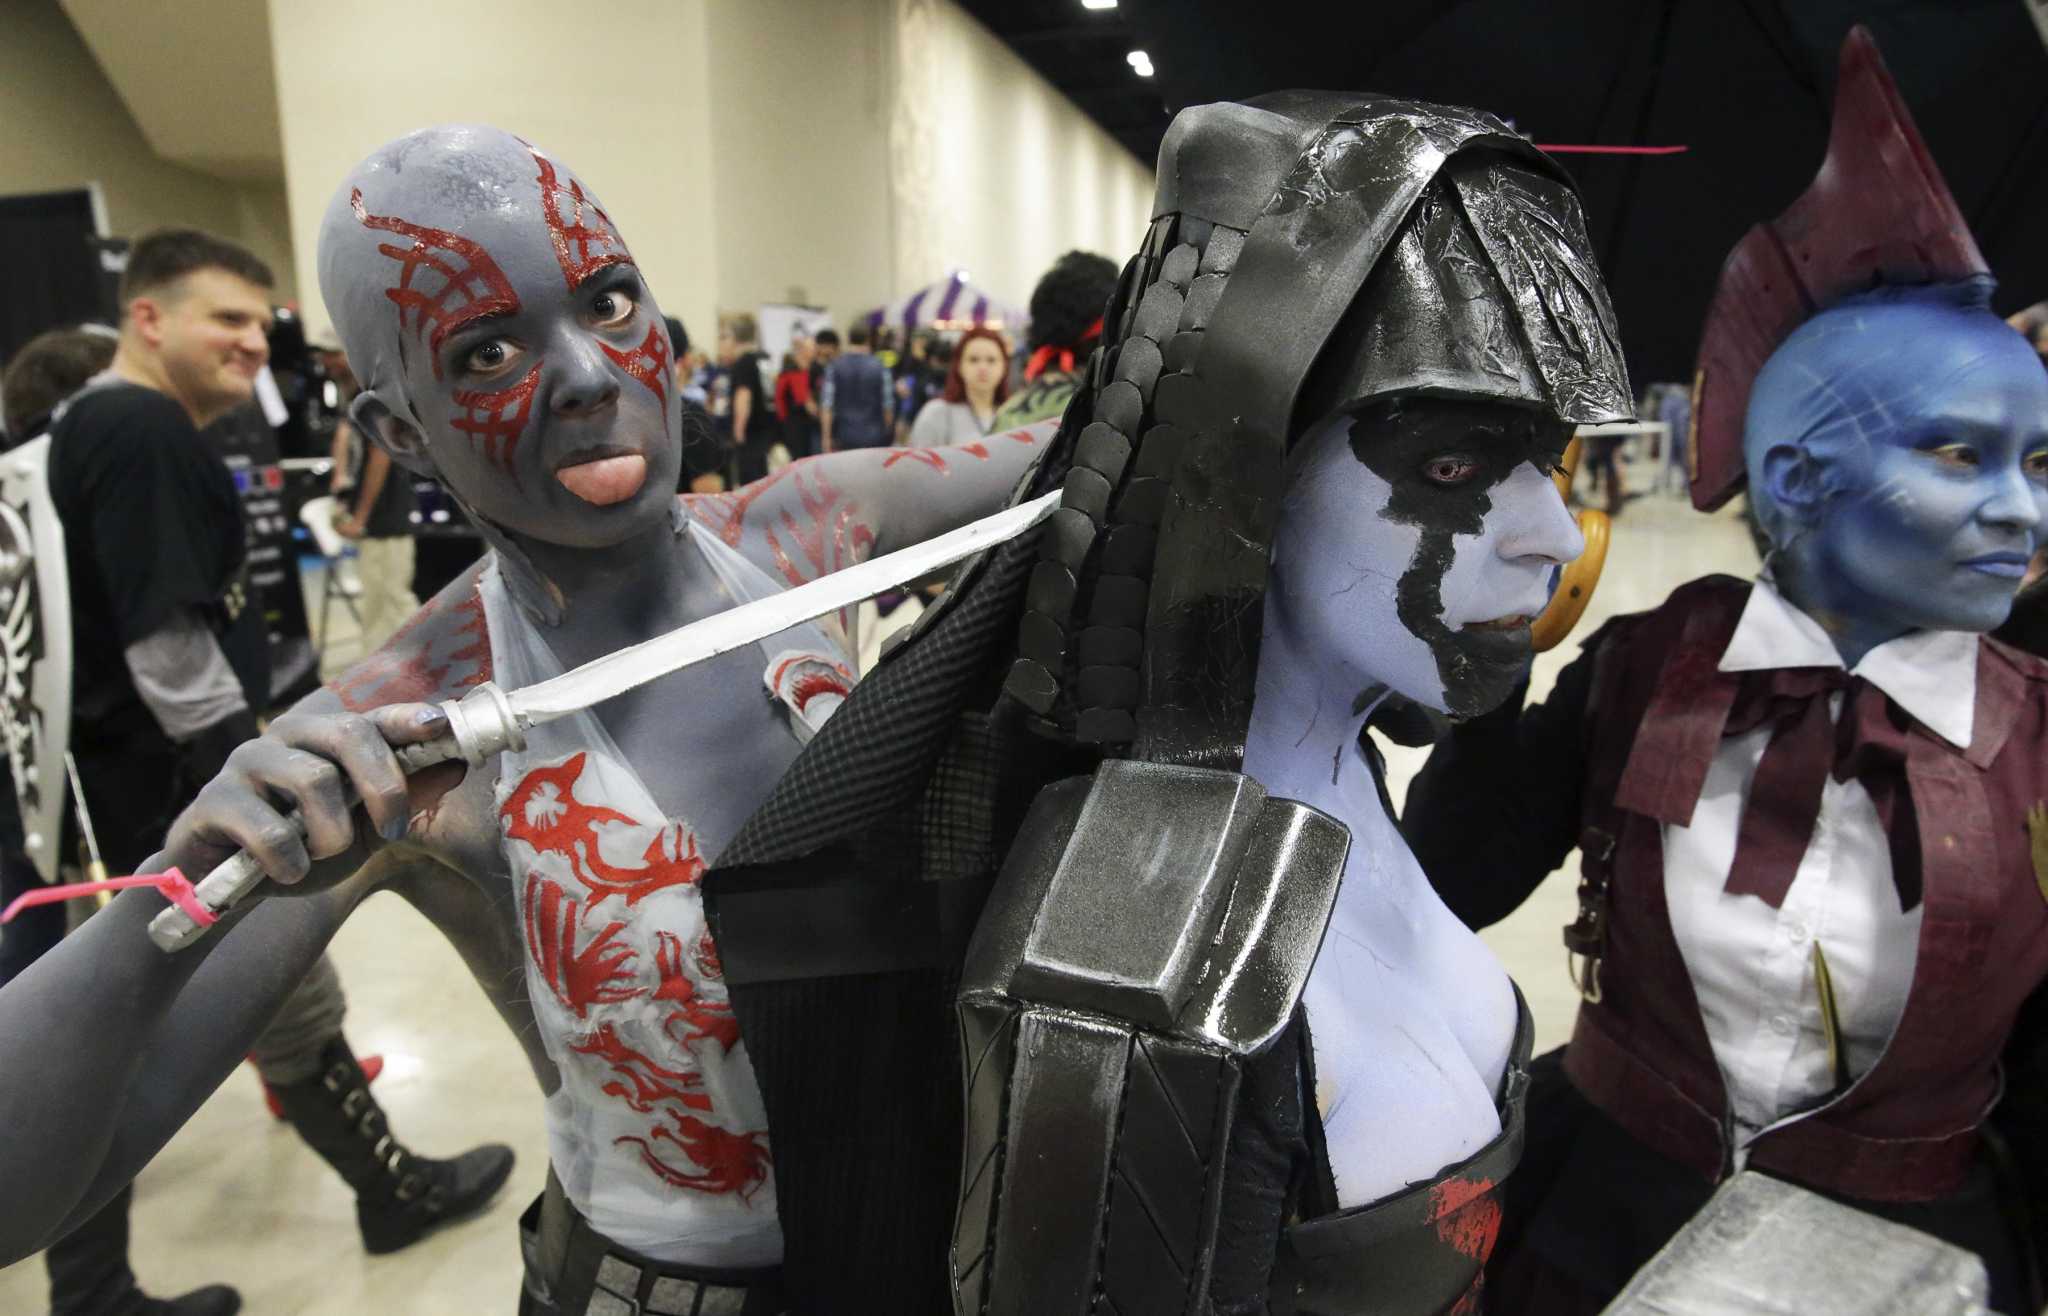 Alamo City Comic Con hosts a galaxy of stars and fans